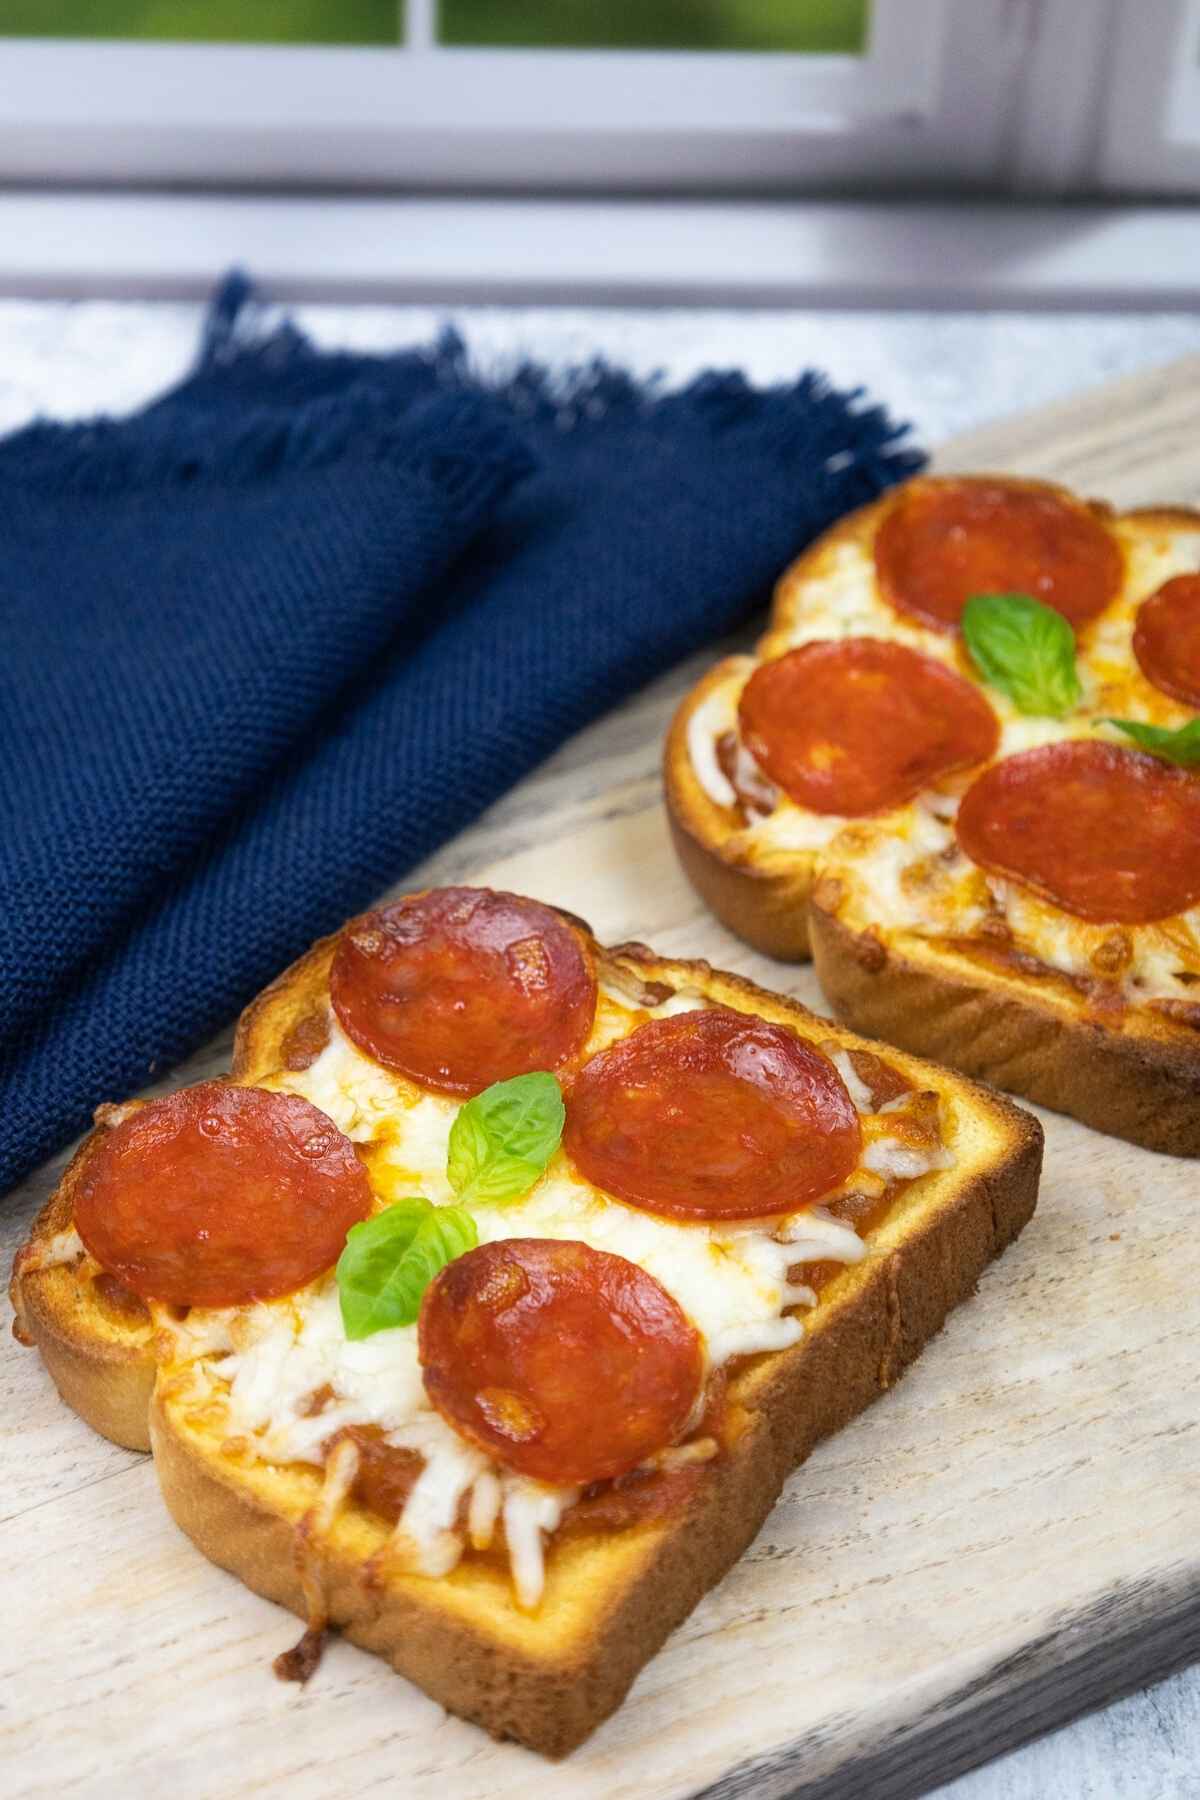 Two slices of pizza toast on a wooden board.